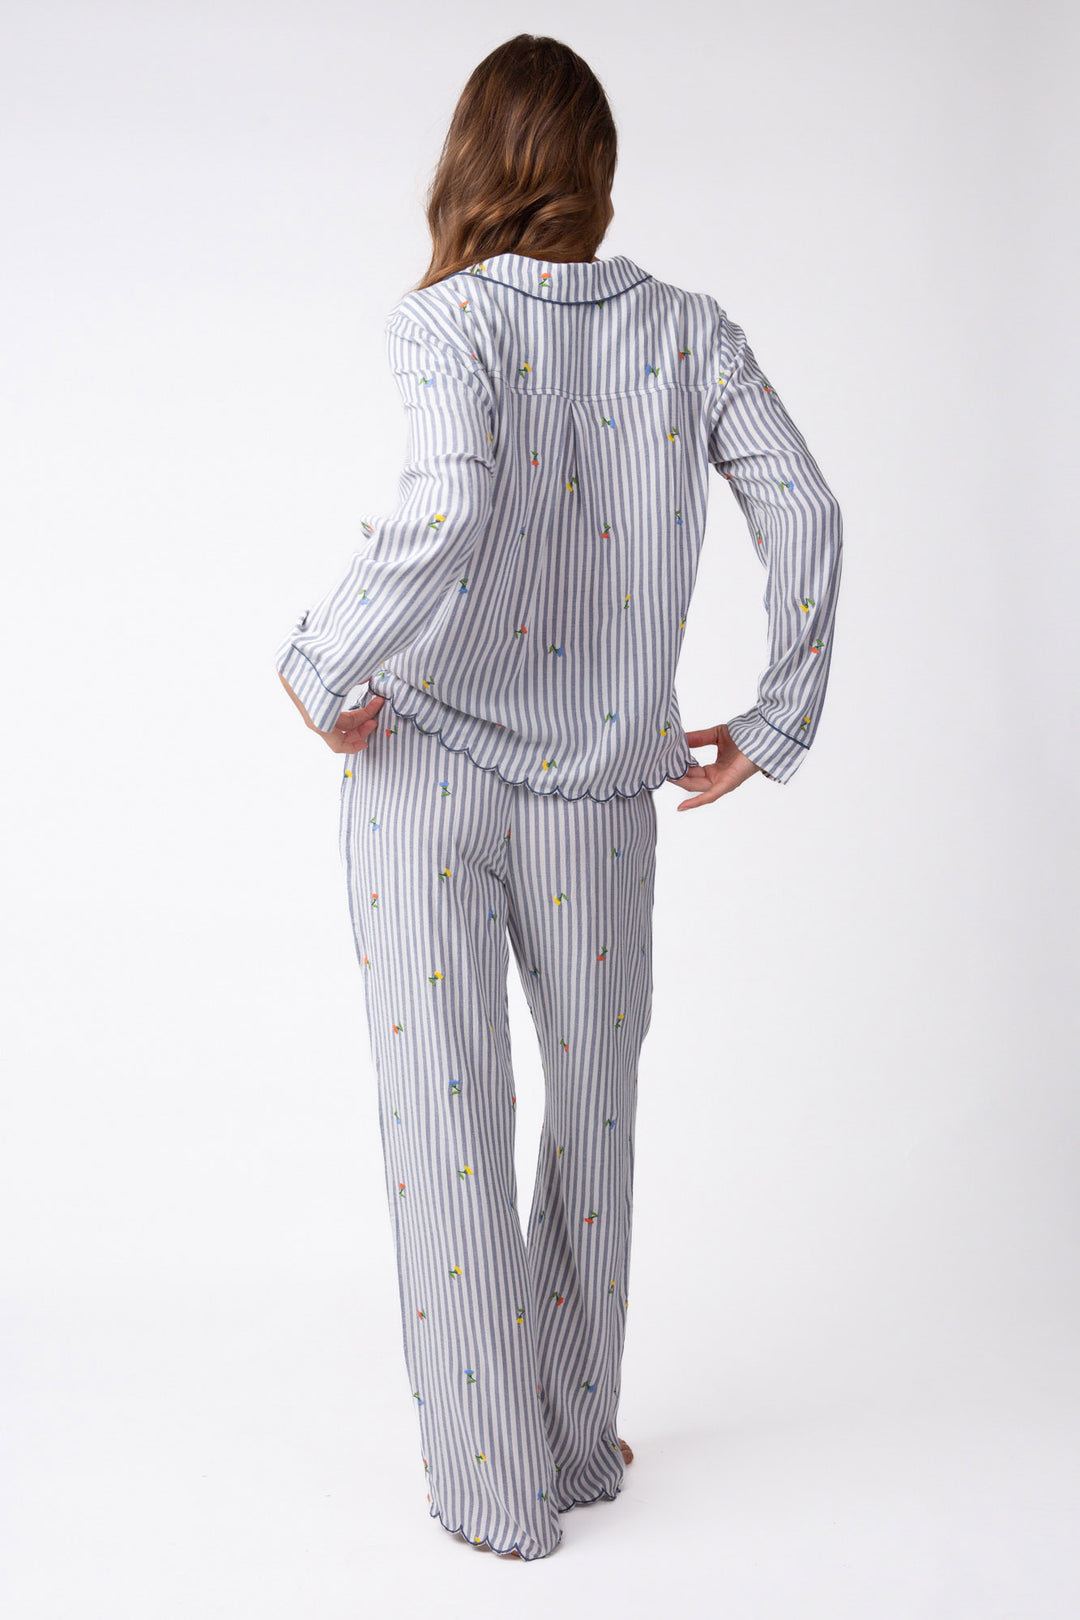 Sleep set long sleeve top + pj pant in yarn-dye striped woven with mini embroidered flowers.